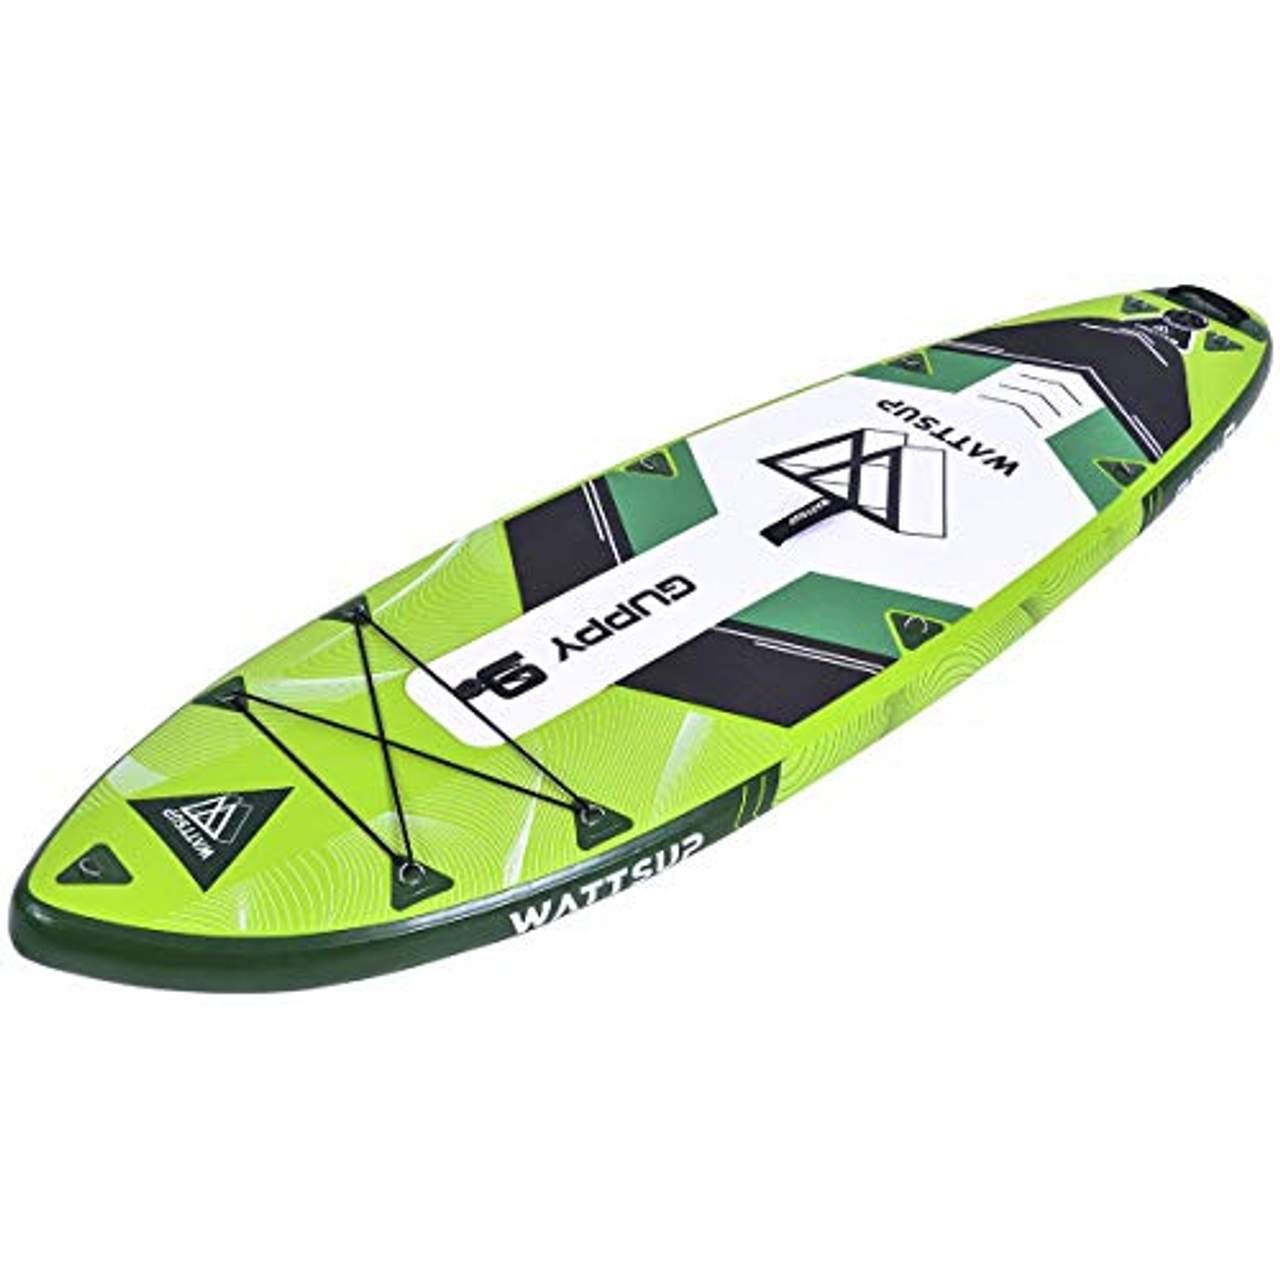 WS WattSUP Guppy 9’0” SUP Board Stand Up Paddle Surf-Board Paddel